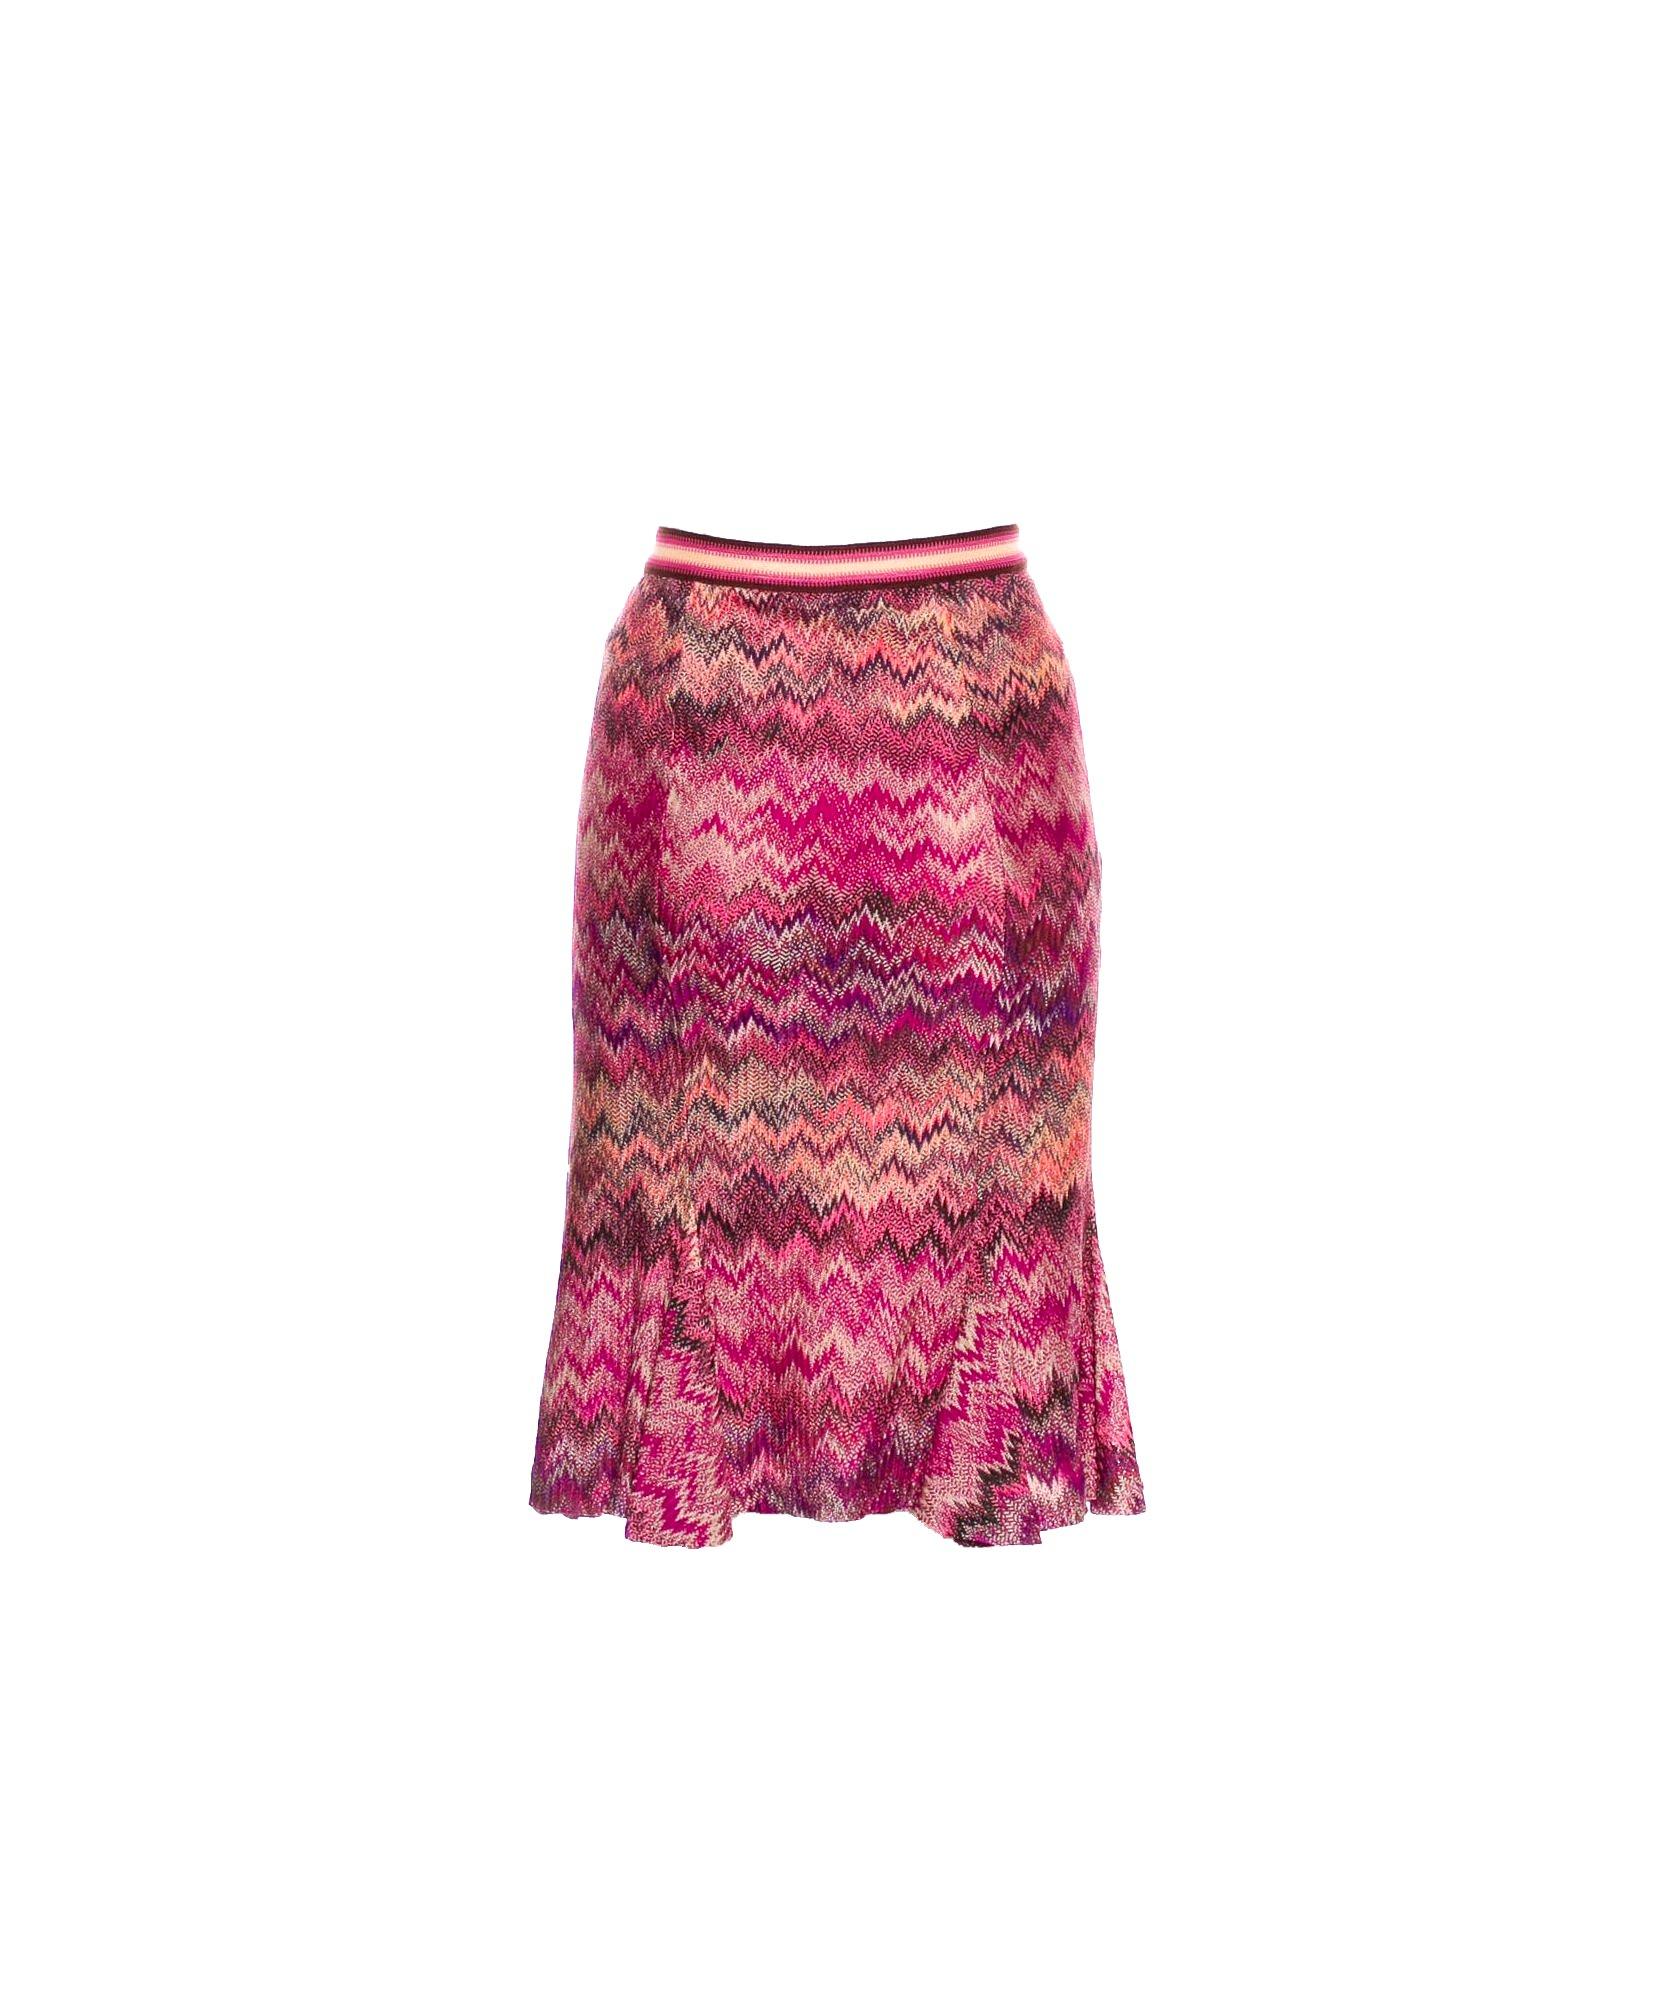 BEAUTIFUL MISSONI ORANGE LABEL SIGNATURE ZIGZAG KNIT SKIRT

DETAILS:

    Beautiful pink & purple shades in the classic MISSONI Signature zigzag knit
    Main line orange label
    Closes with hidden zipper
    With stunning waistband
    Made in